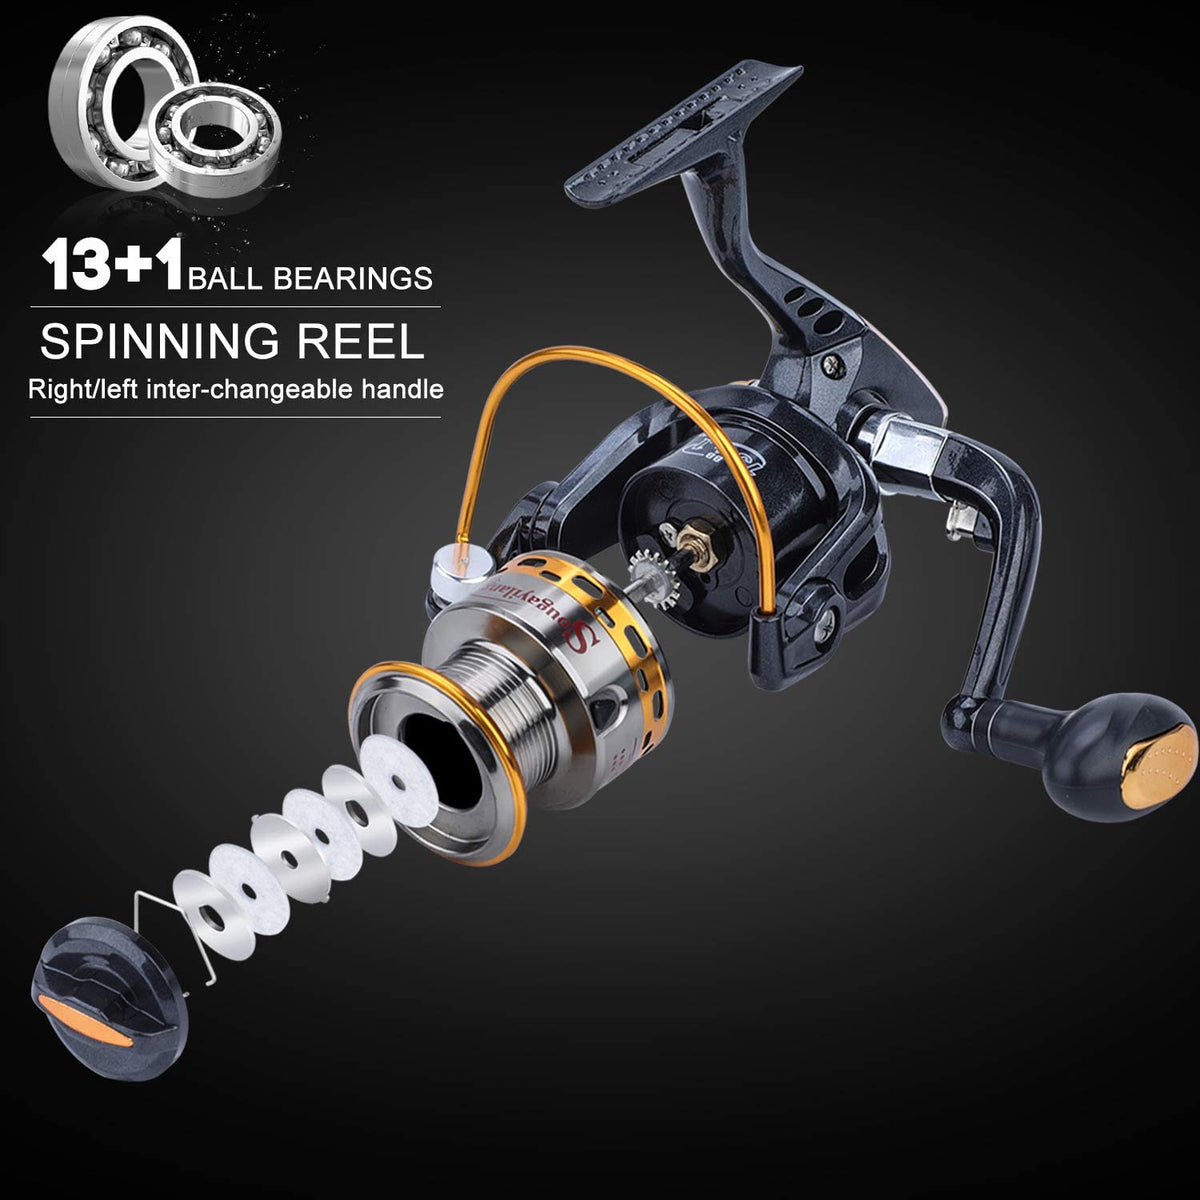 Sougayilang Telescopic Fishing Rod Reel Combos with Carbon Fiber Fishing  Pole Spinning Reels and Fishing Accessories for Travel Ocean Saltwater  Freshwater Fishing, Spinning Combos -  Canada